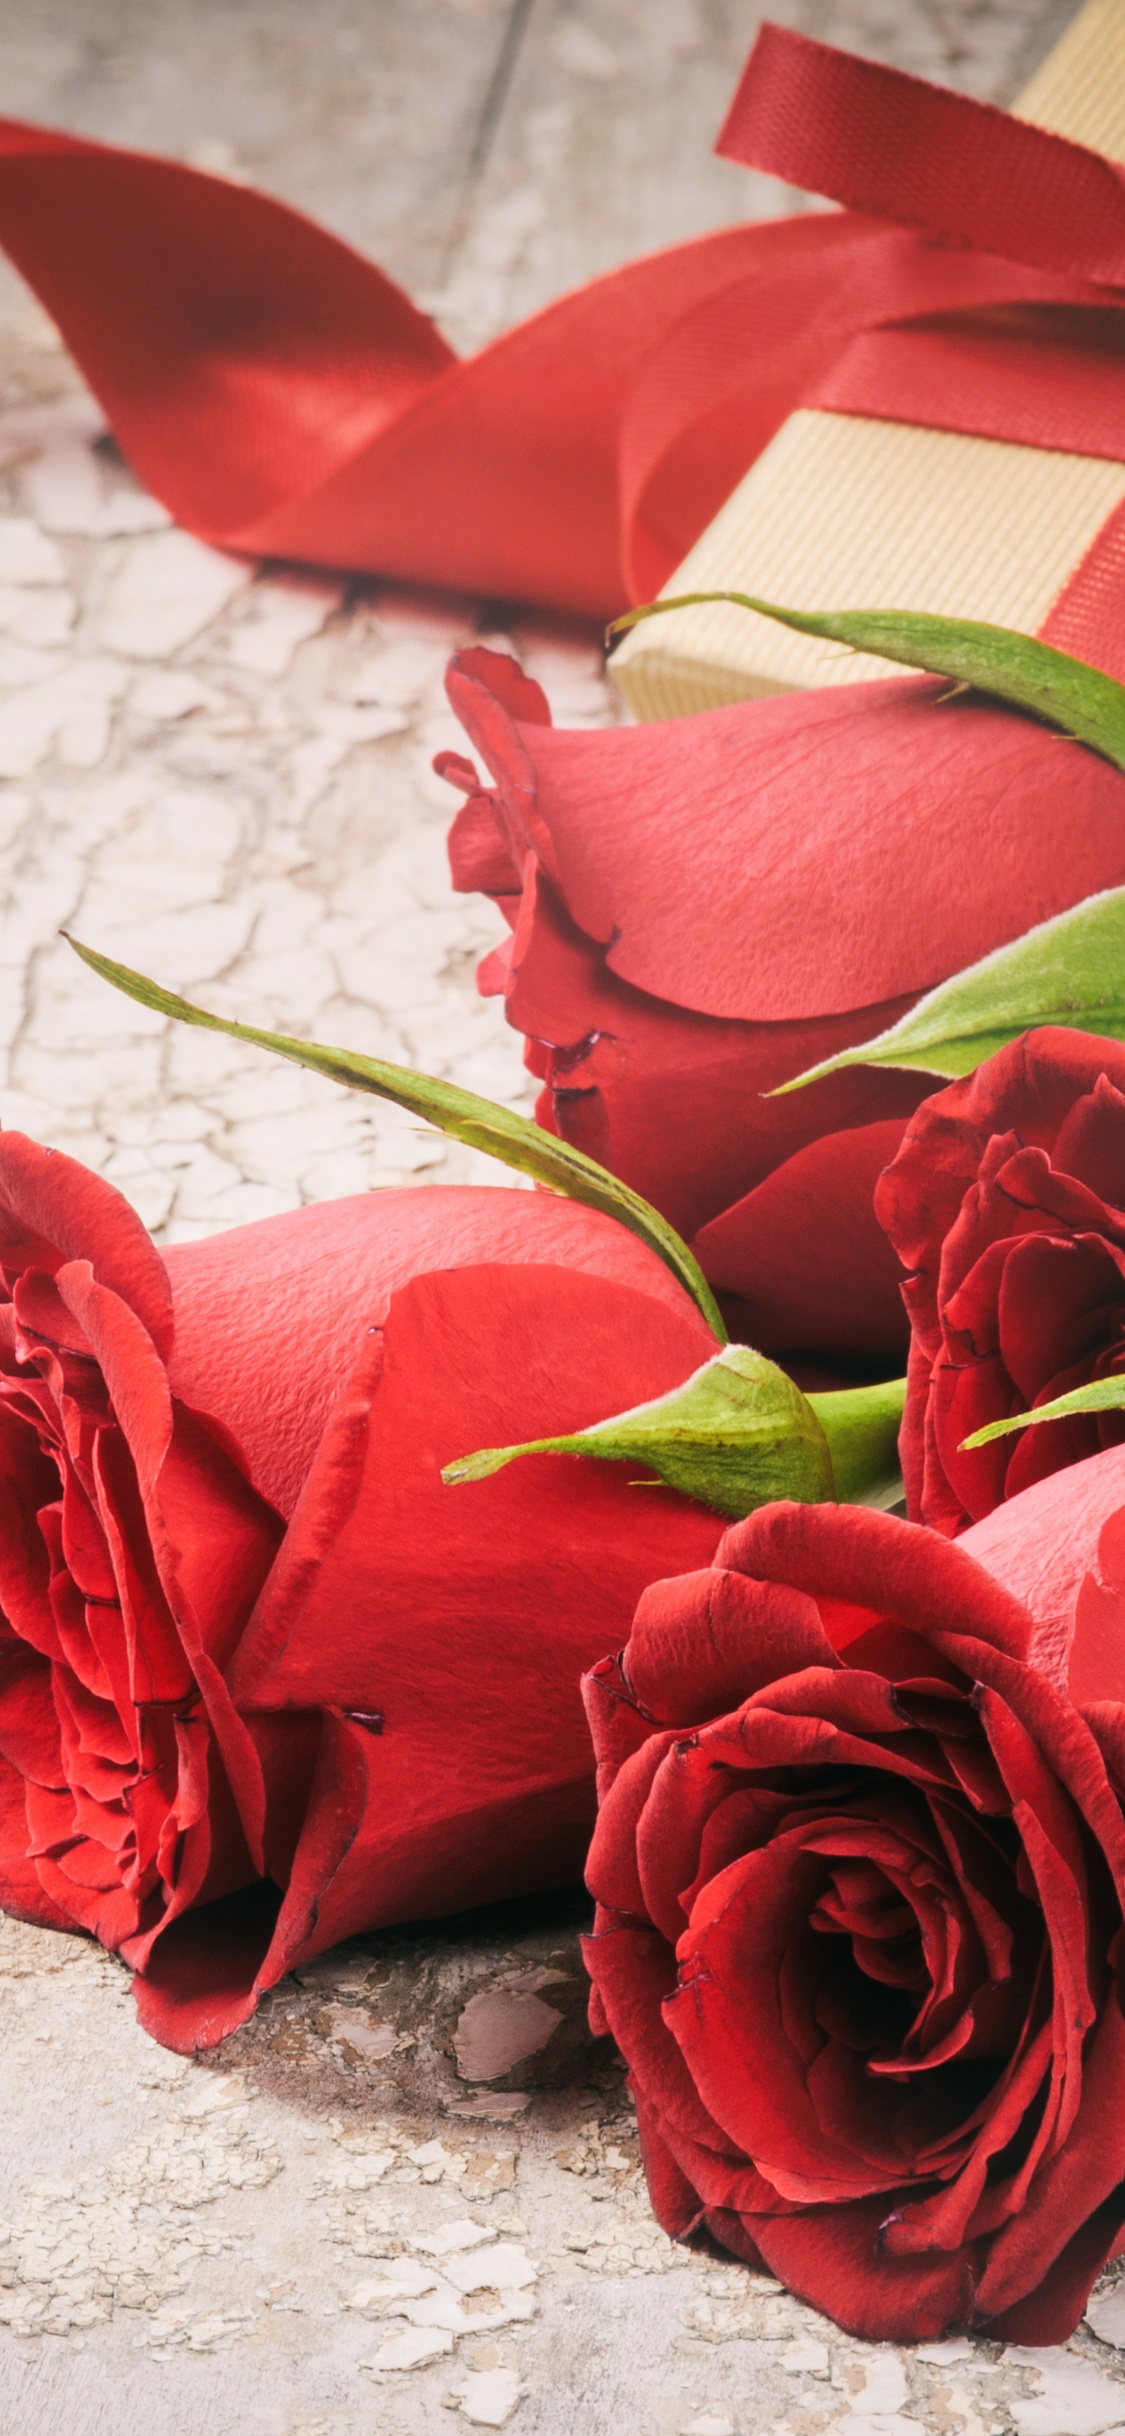 Red Roses on White Textile. Wallpaper in 1125x2436 Resolution